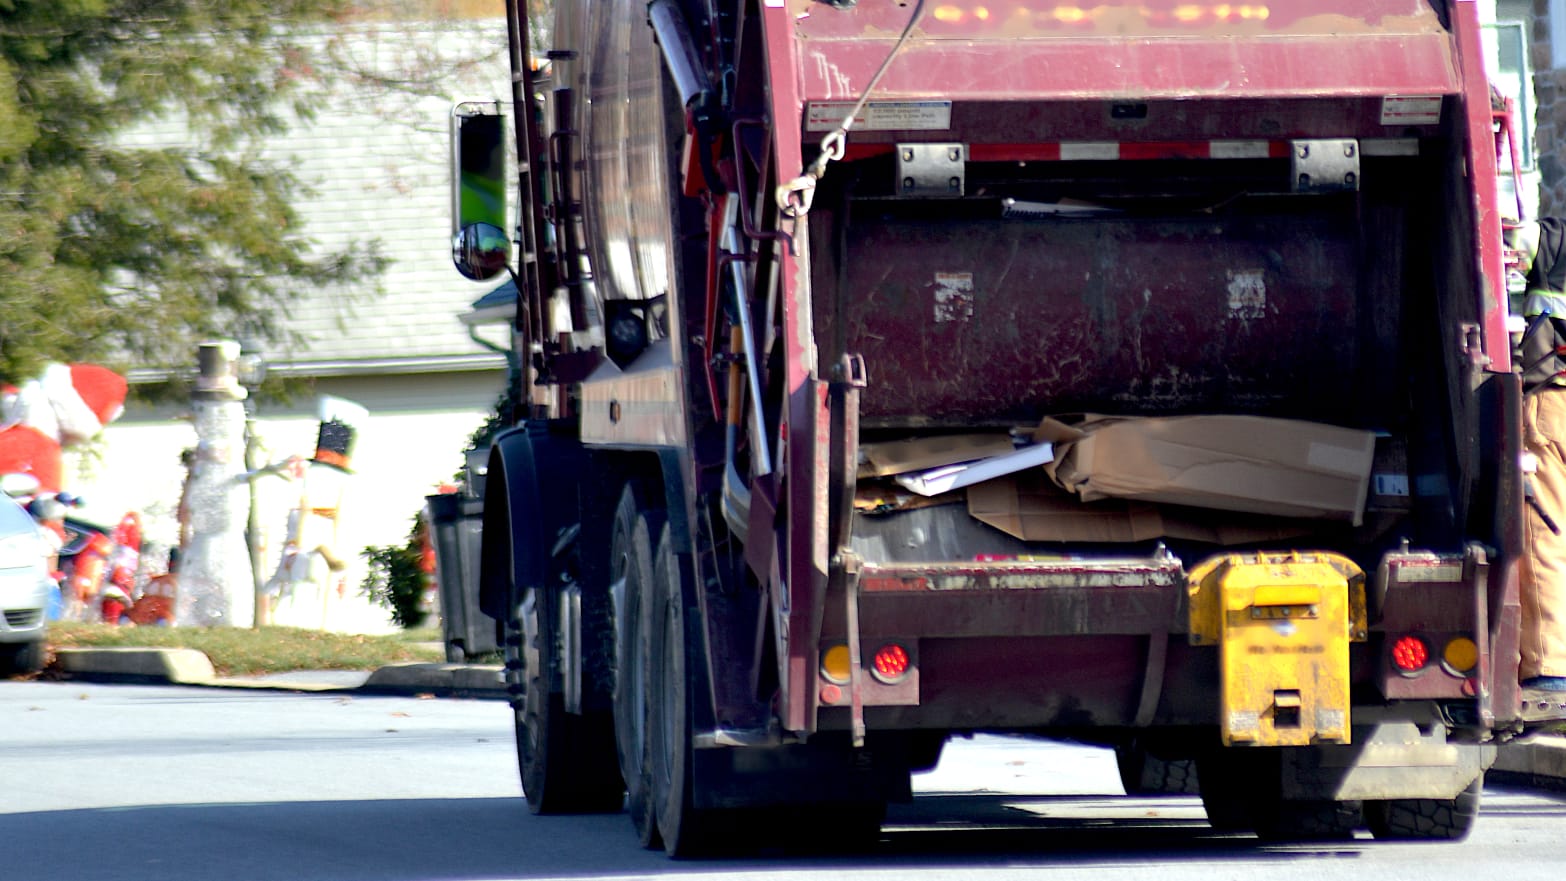 A woman was accidentally compacted in a New Hampshire garbage truck several times before being noticed. 